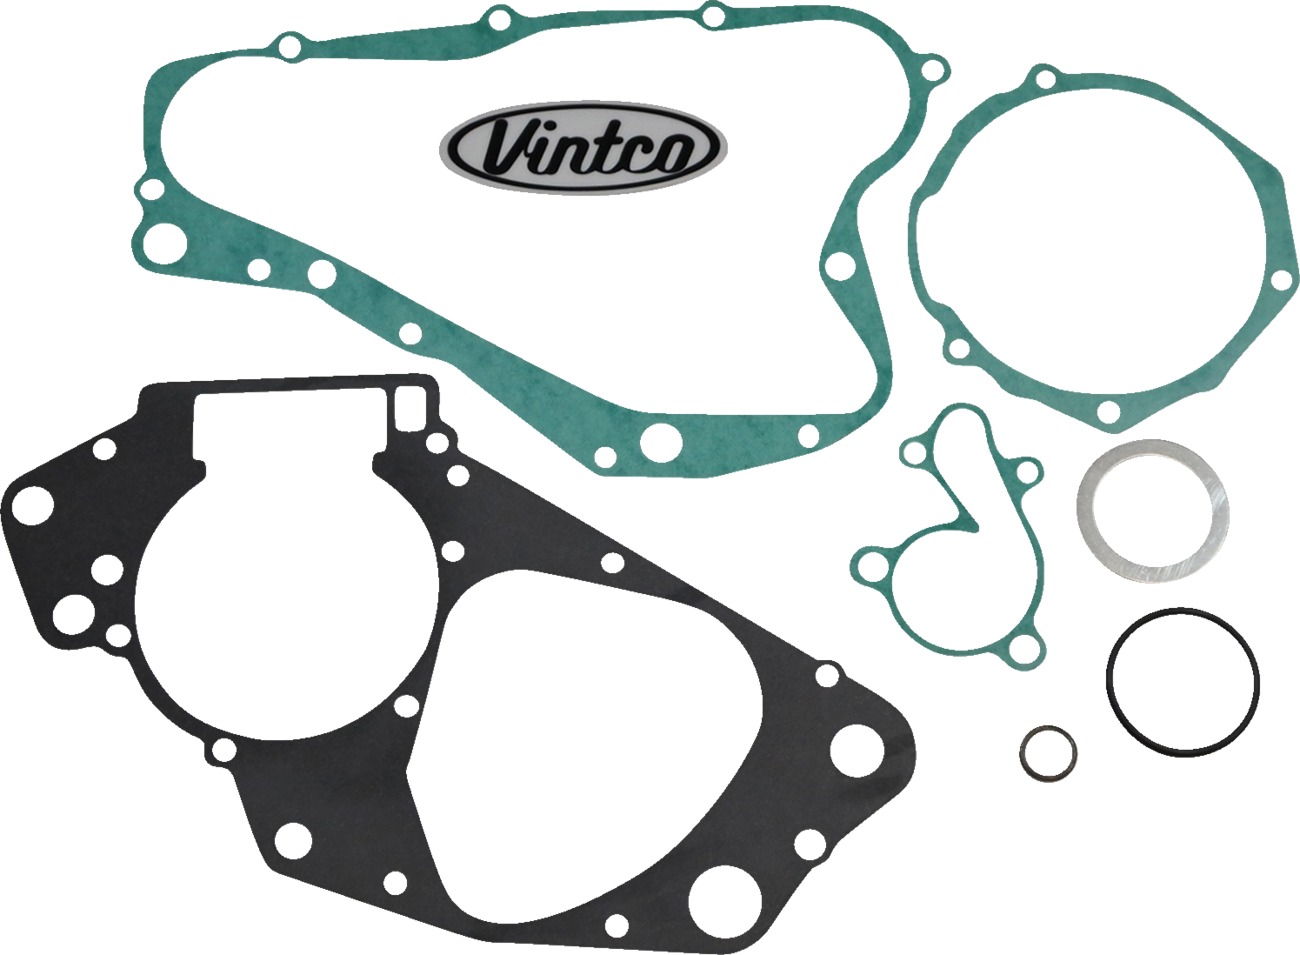 Lower Engine Gasket Kit - For 87-88 Suzuki RM125 - Click Image to Close